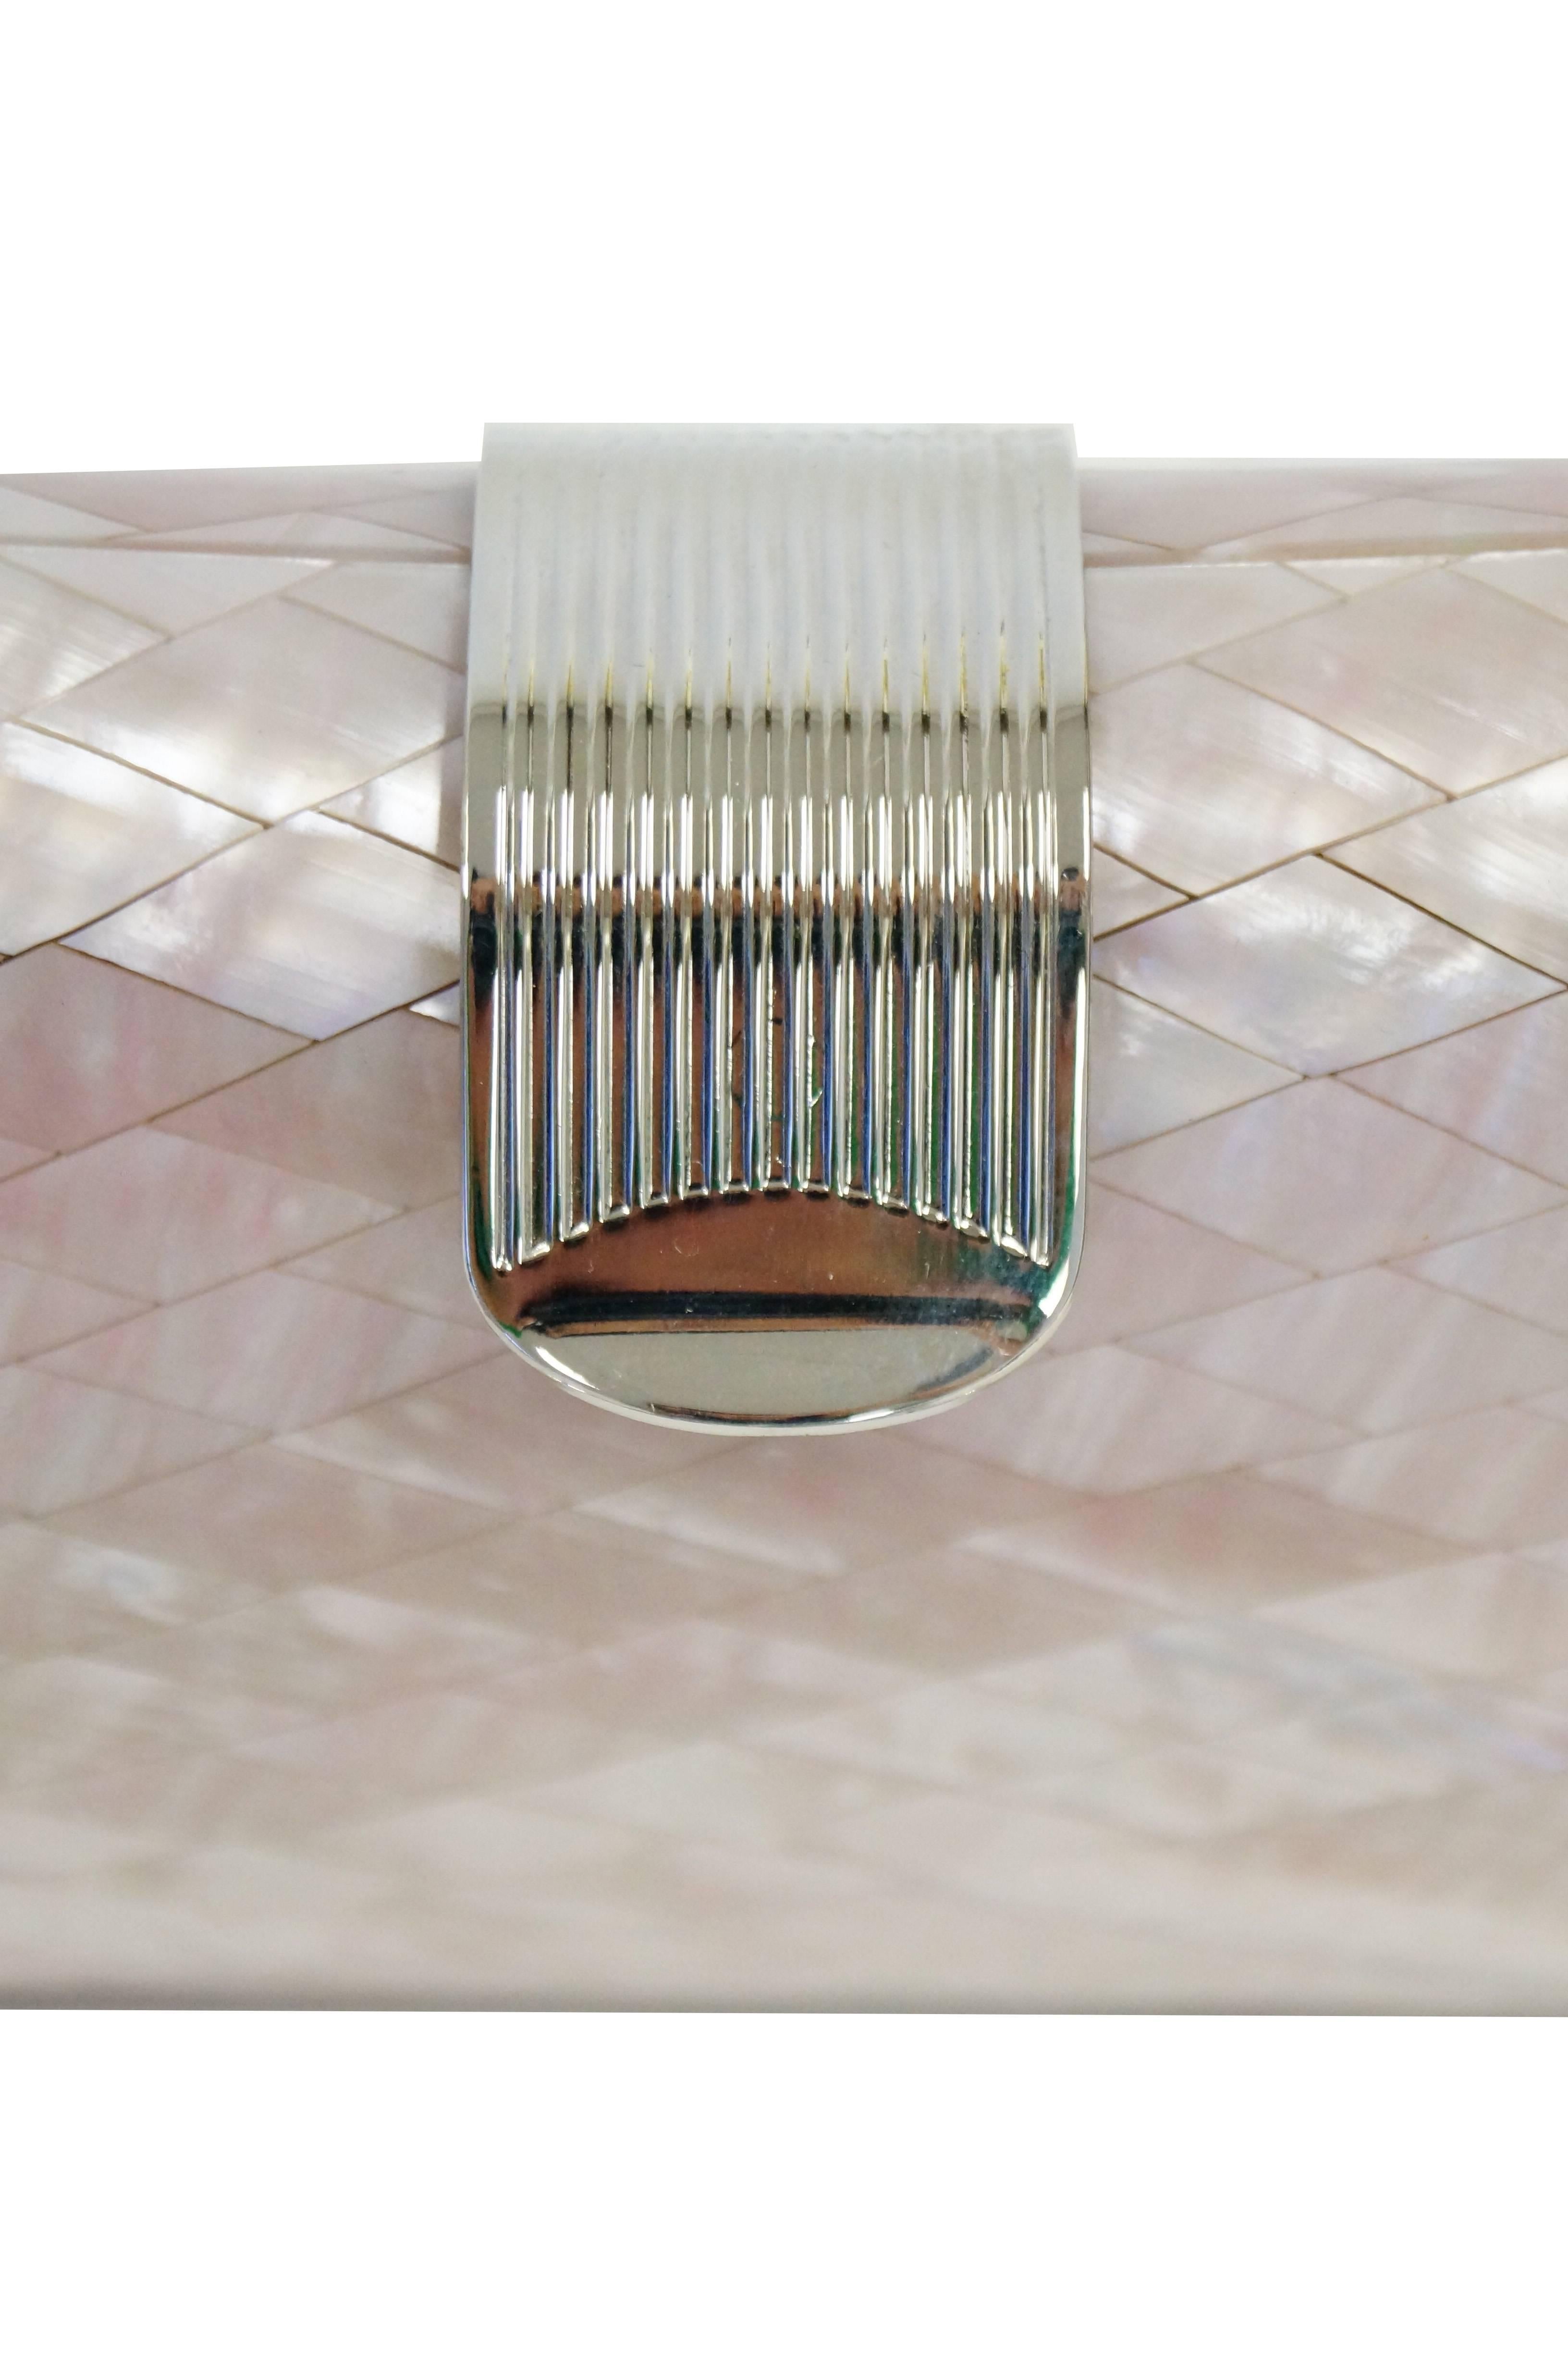 Beautiful iridescent pink evening clutch by Lisette. The clutch is rectangular with curved corners and rounded sides. The clutch is composed of shiny pink mother of pearl diamonds arranged in a grid, and covered in a layer of lucite. The top of the